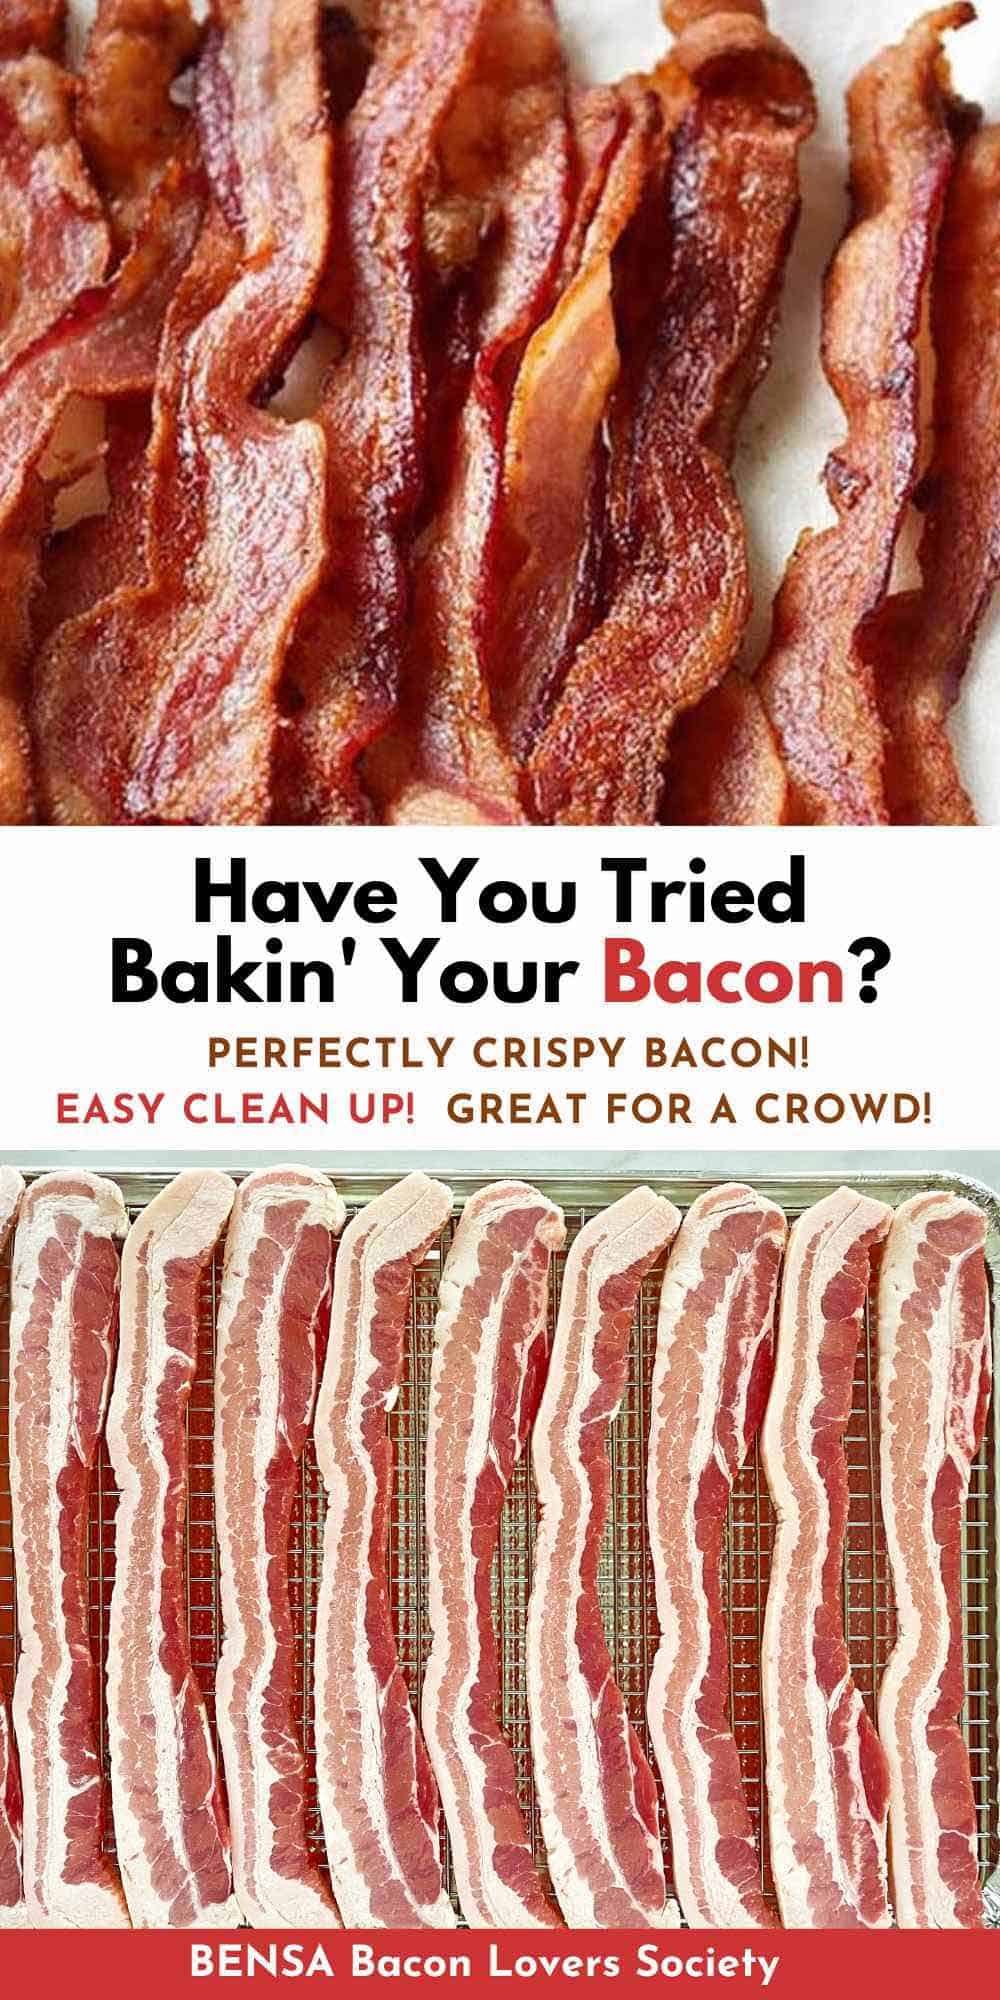 A dozen slices of golden brown crispy oven cooked bacon, and nine strips of uncooked bacon on a cookie sheet.